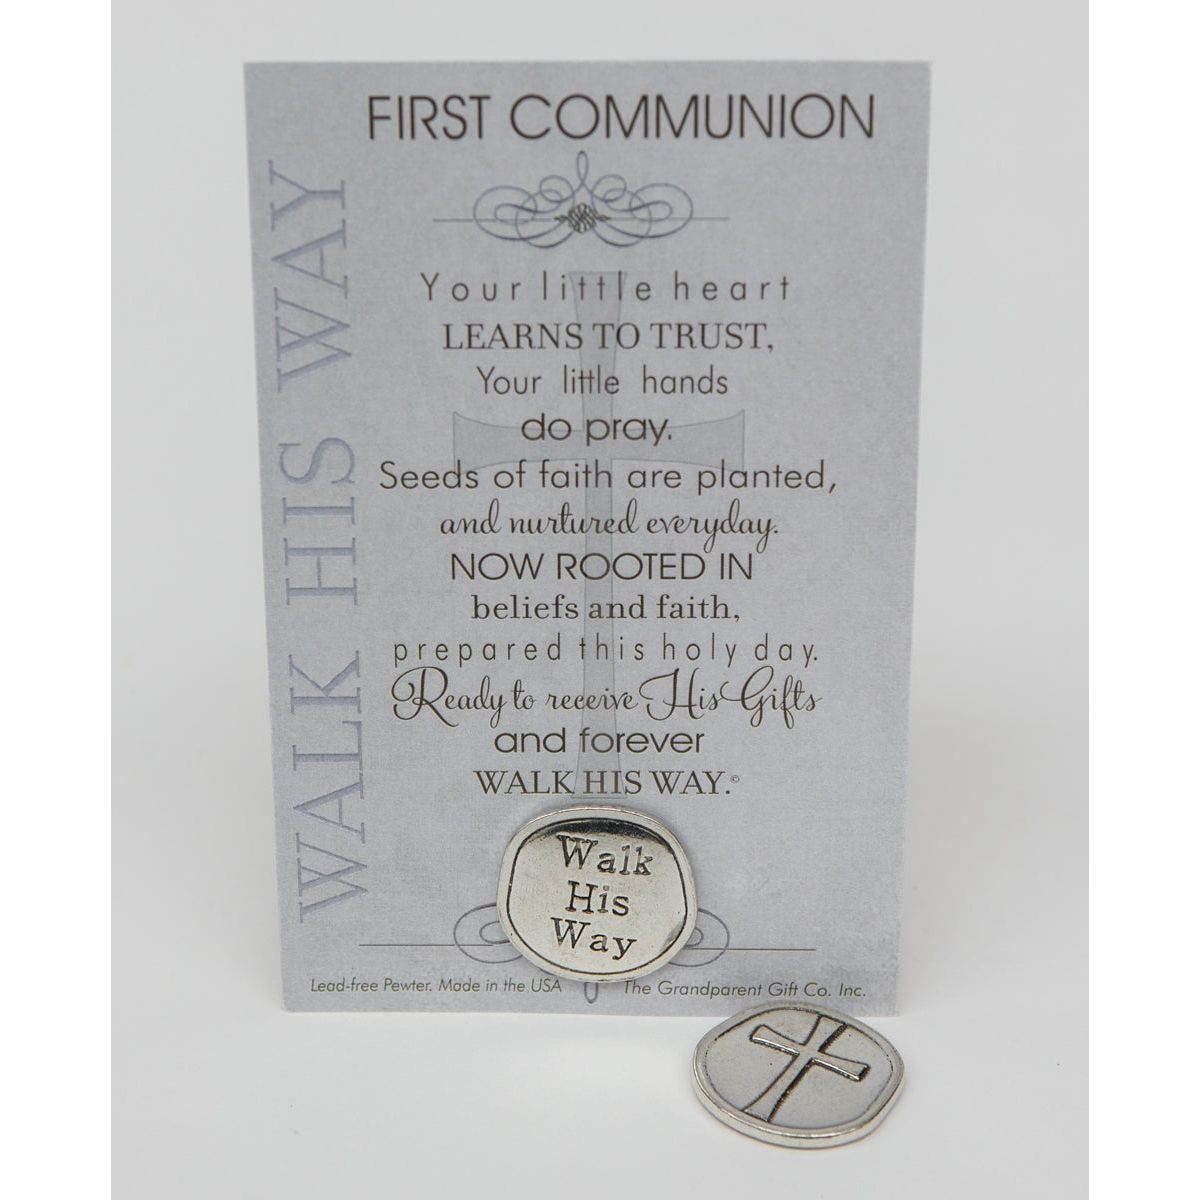 First Communion Gift: Handmade Pewter Coin